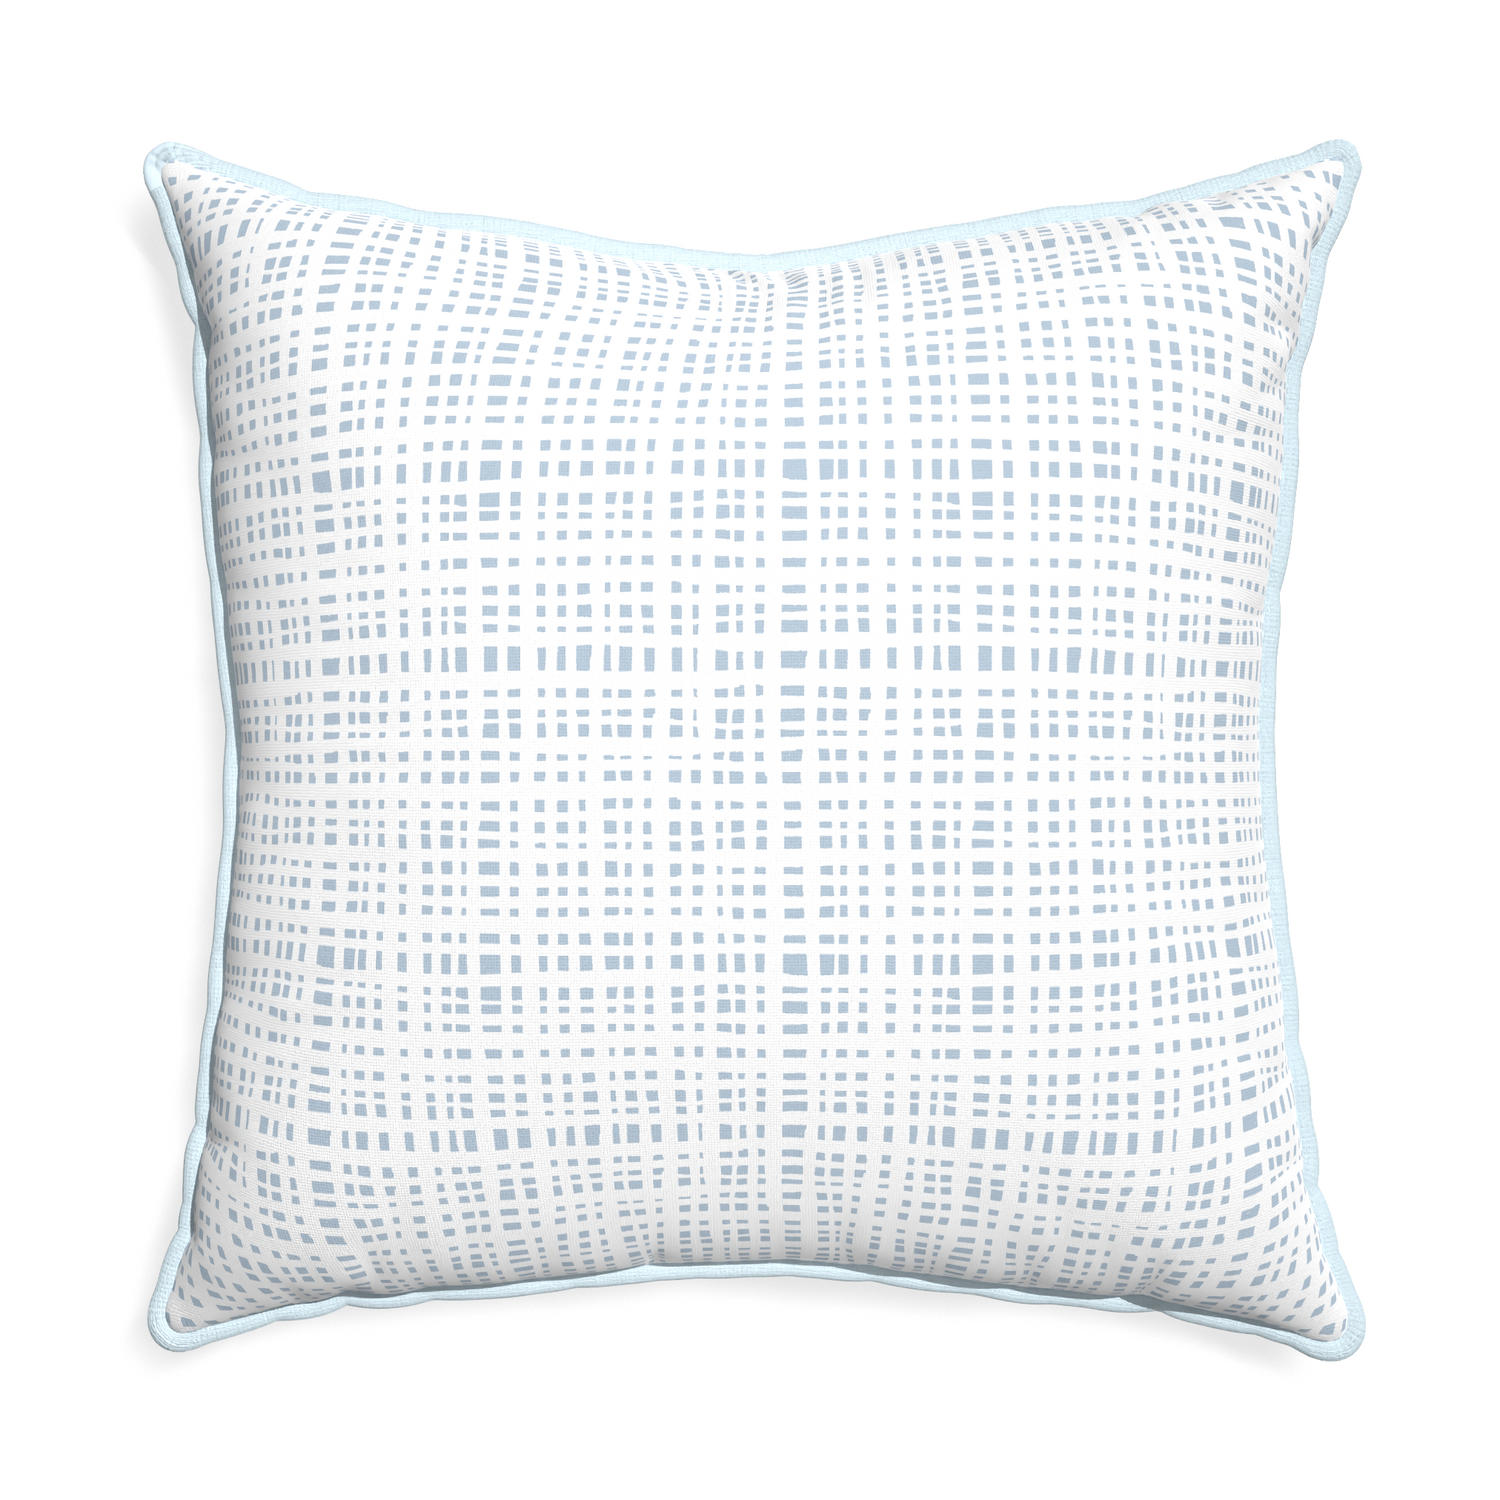 Euro-sham ginger sky custom pillow with powder piping on white background